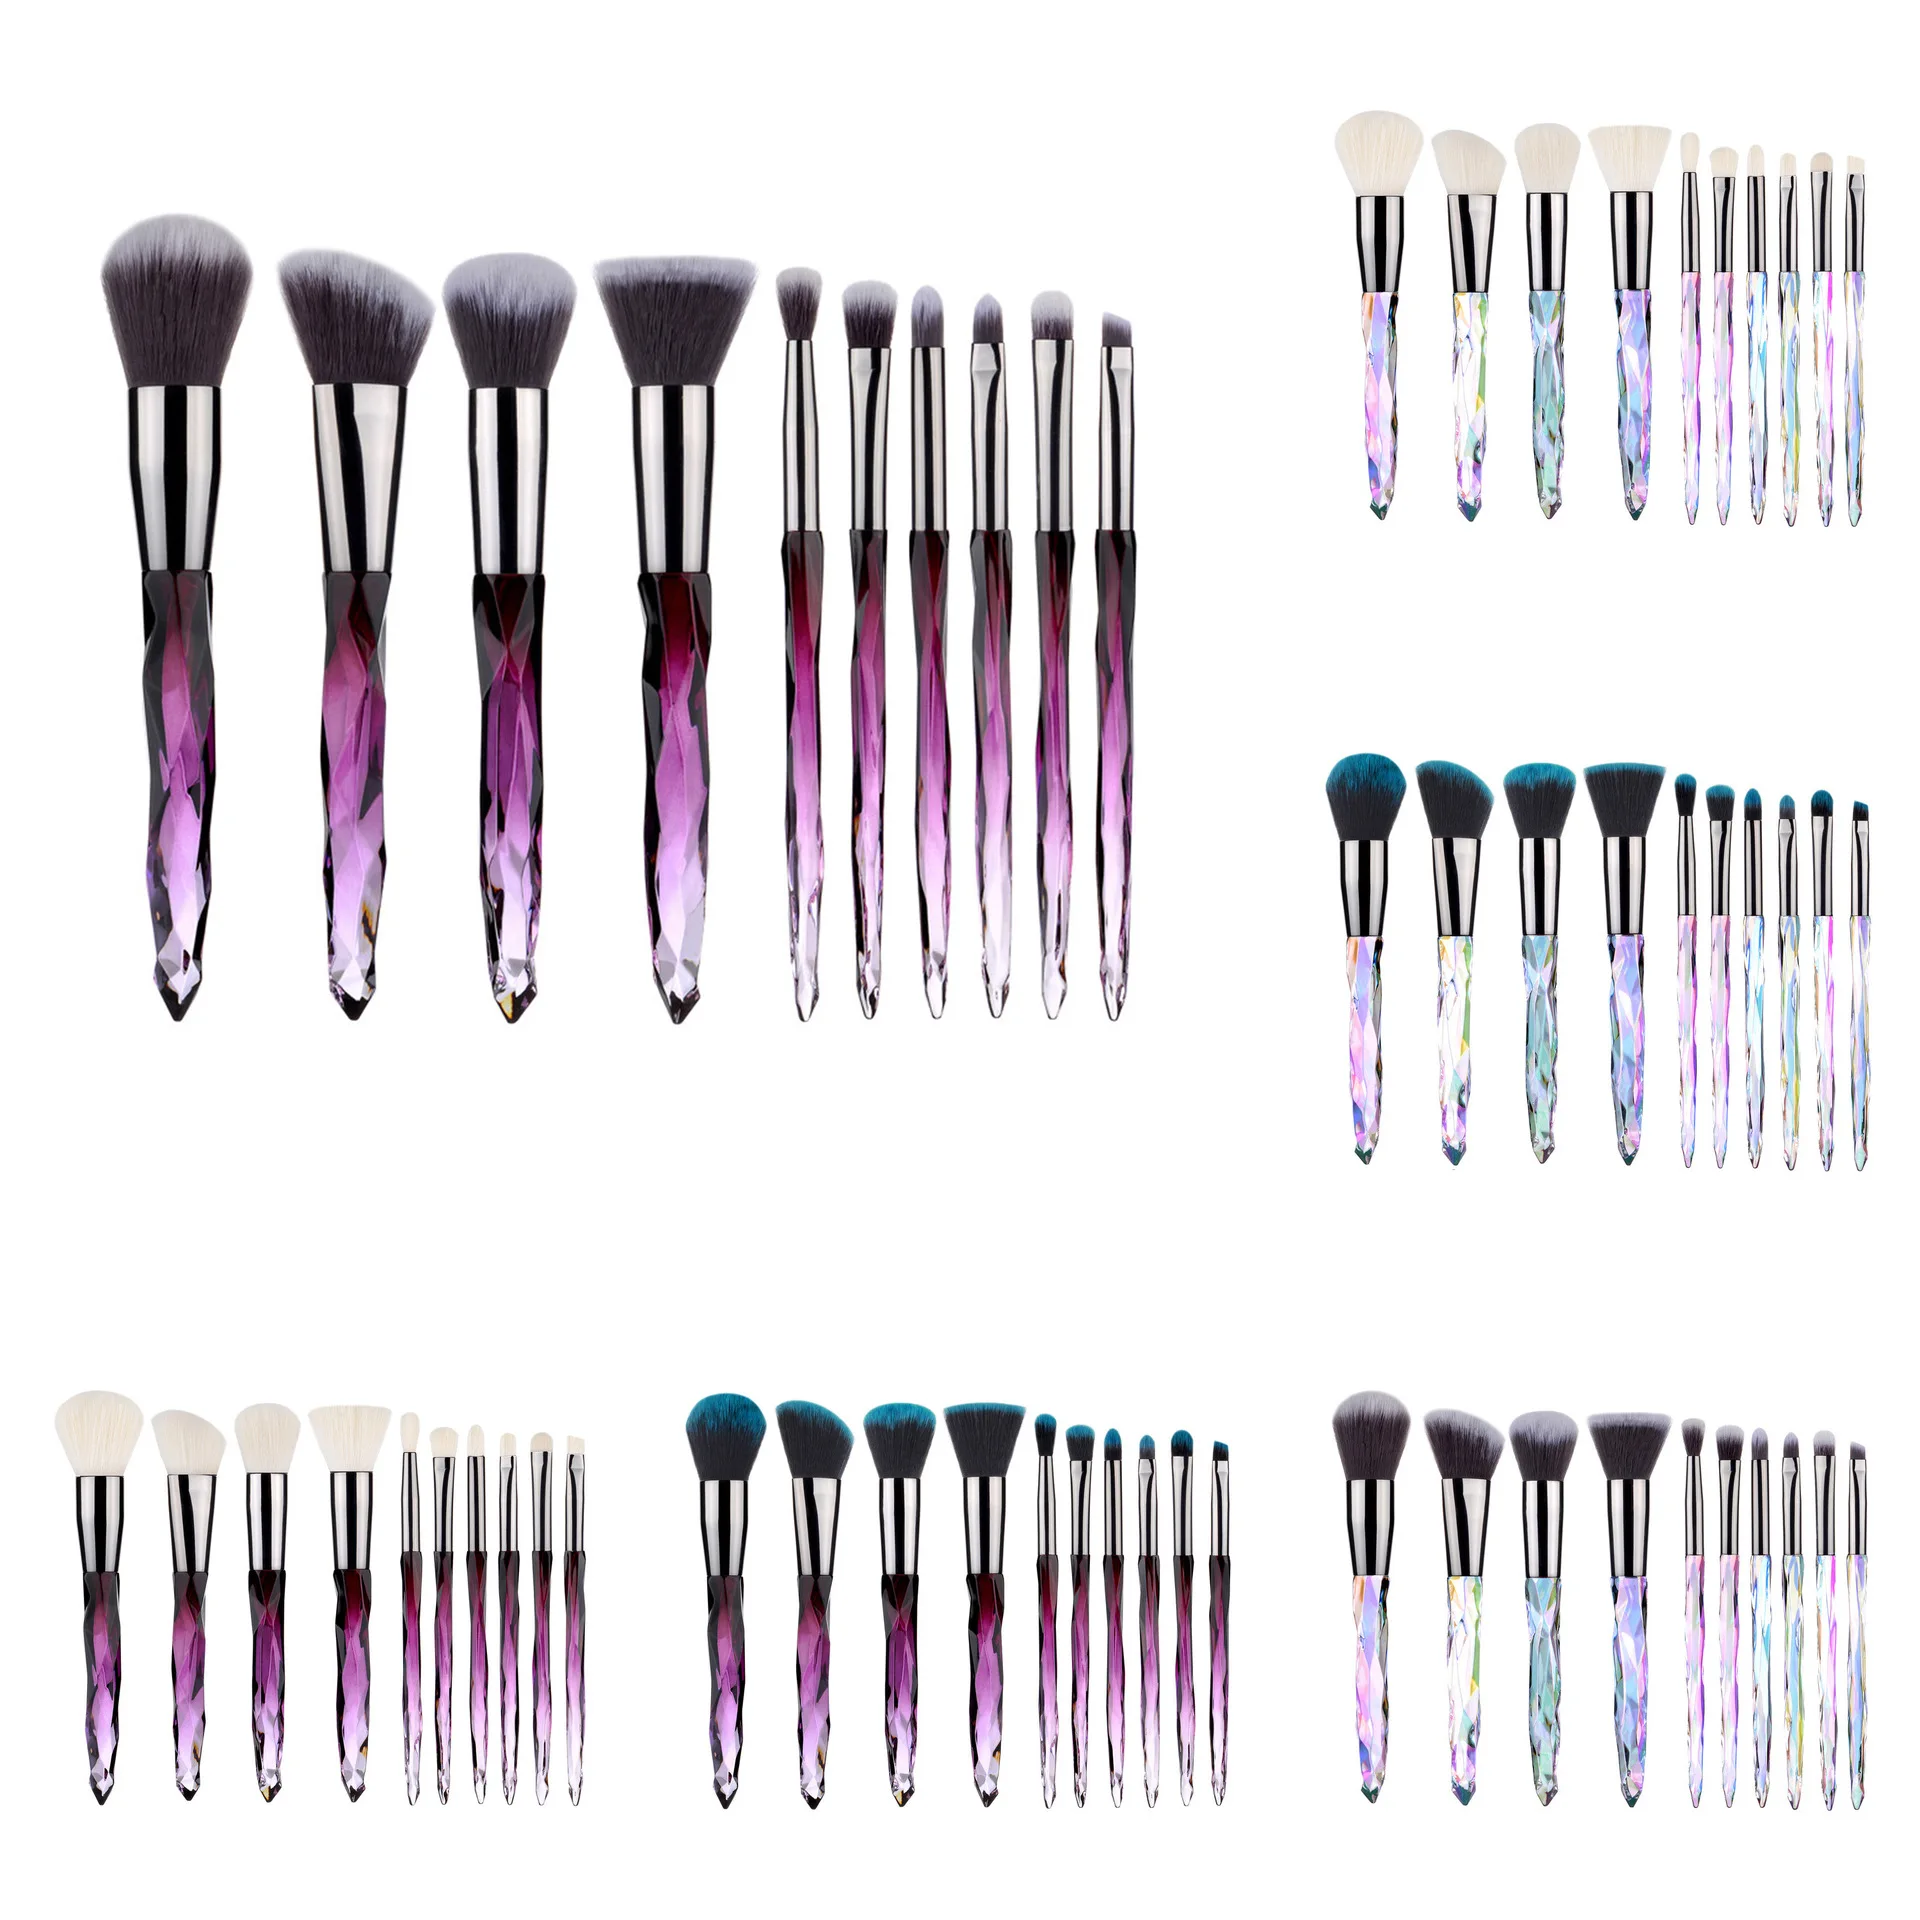 

TALK TO US Private Label Custom Logo-3Y 10pcs Makeup Brush Set-can do amazon FBA label shipping sourcing service to USA German